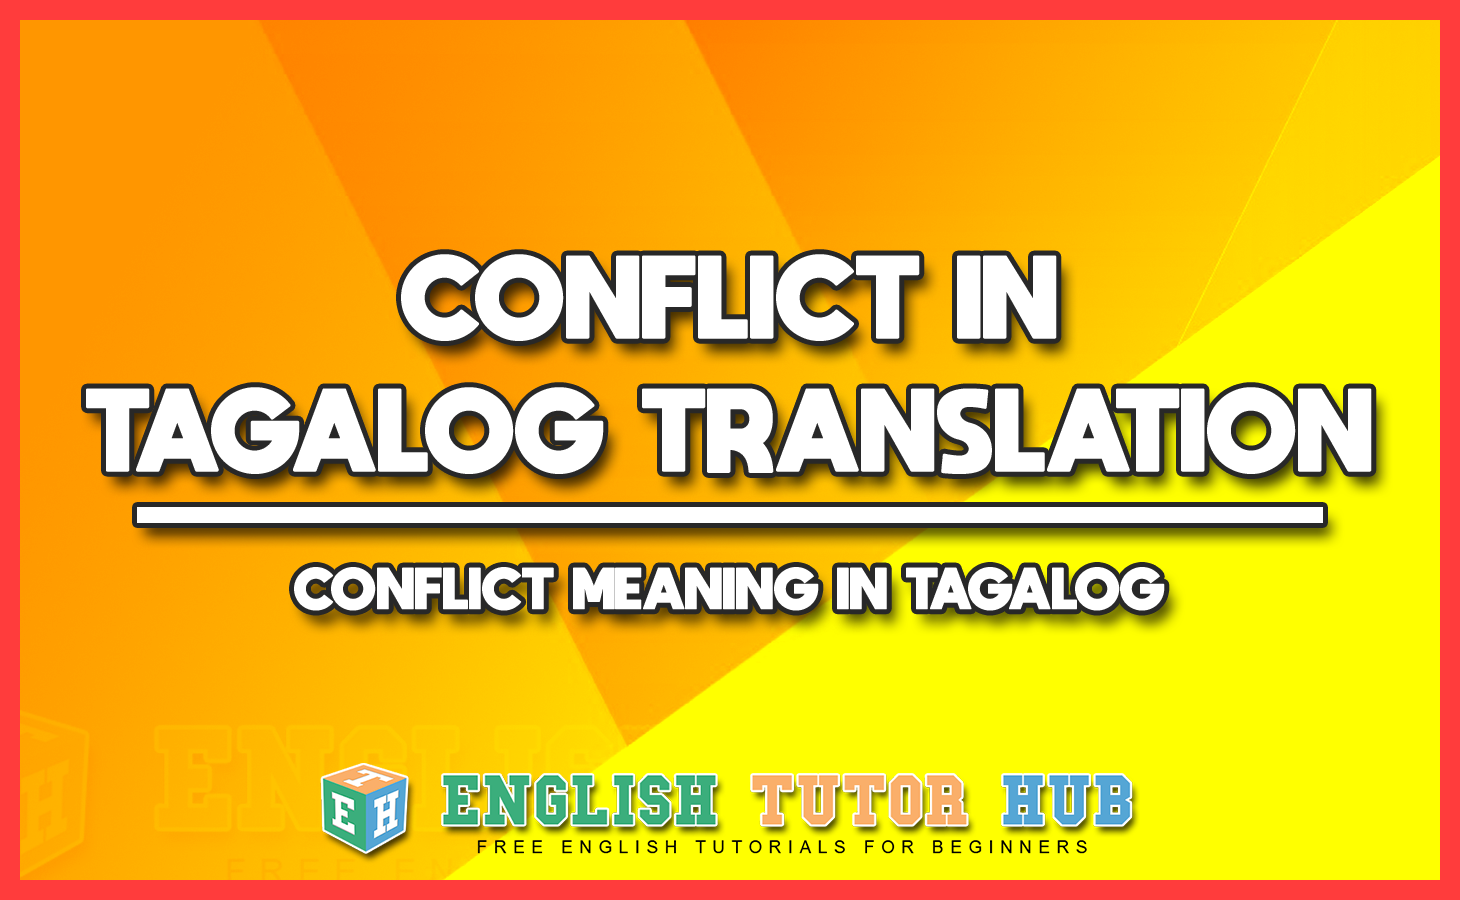 CONFLICT IN TAGALOG TRANSLATION - CONFLICT MEANING IN TAGALOG